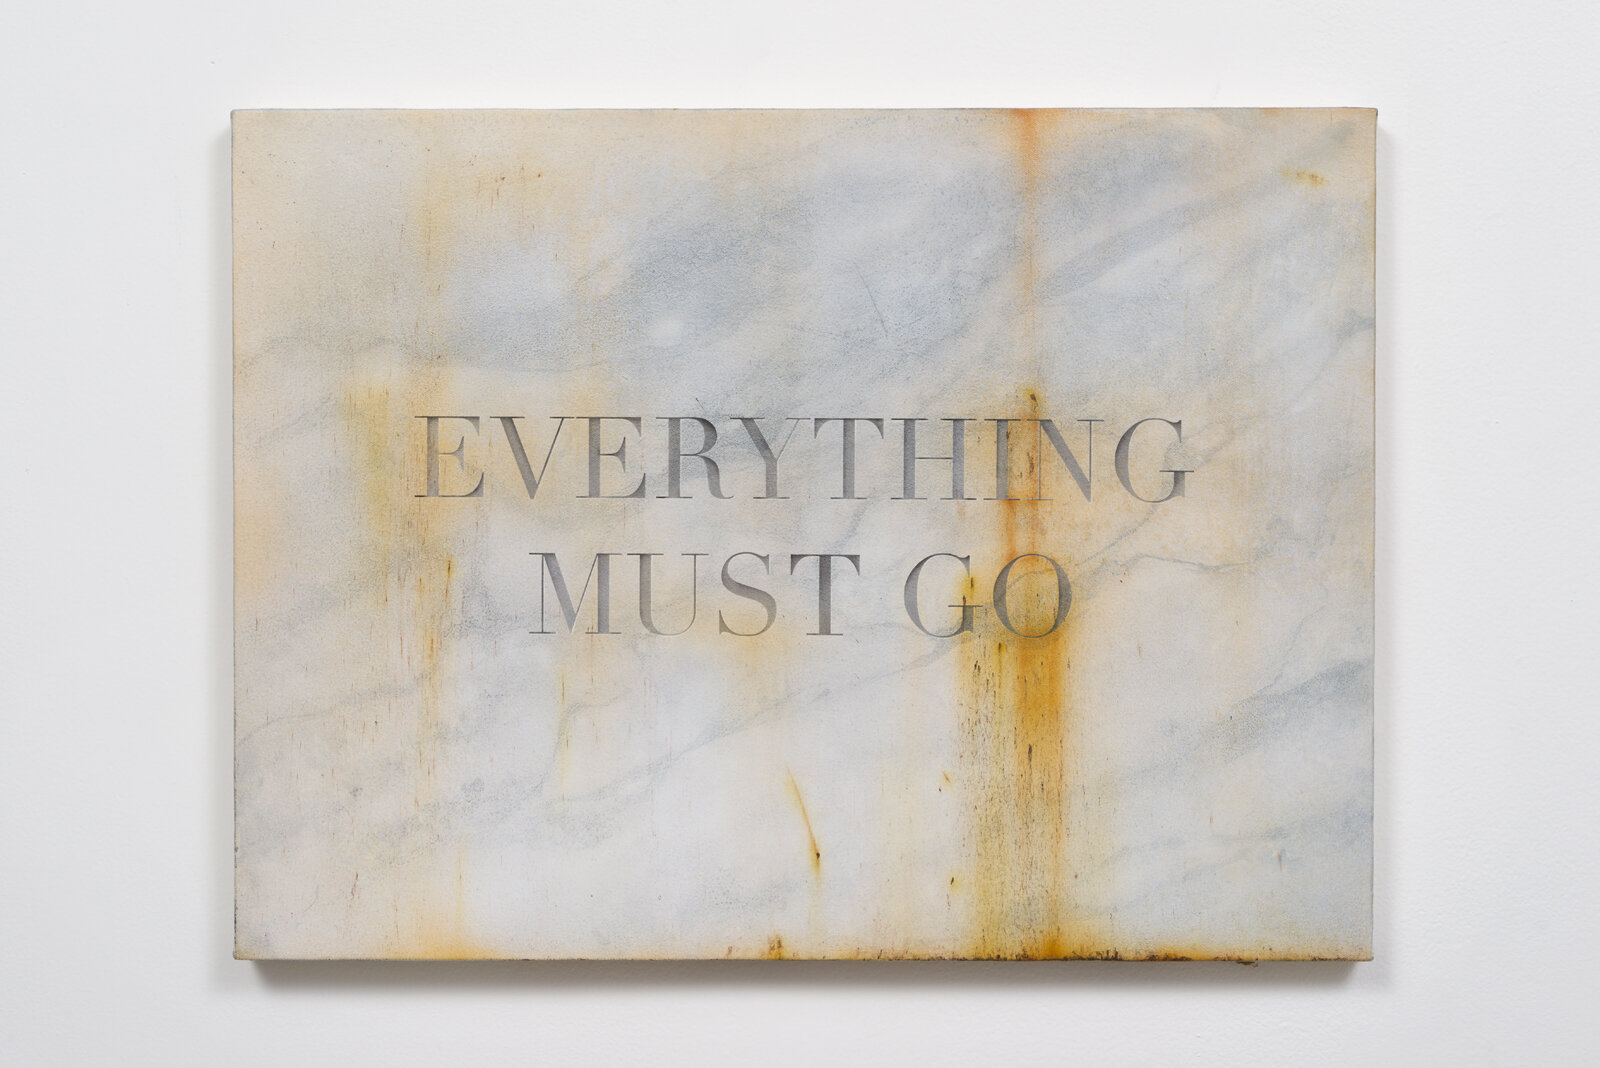   "Everything Must Go" Carrara Marble,  2017. Acrylic on canvas. 24 x 18 inches 